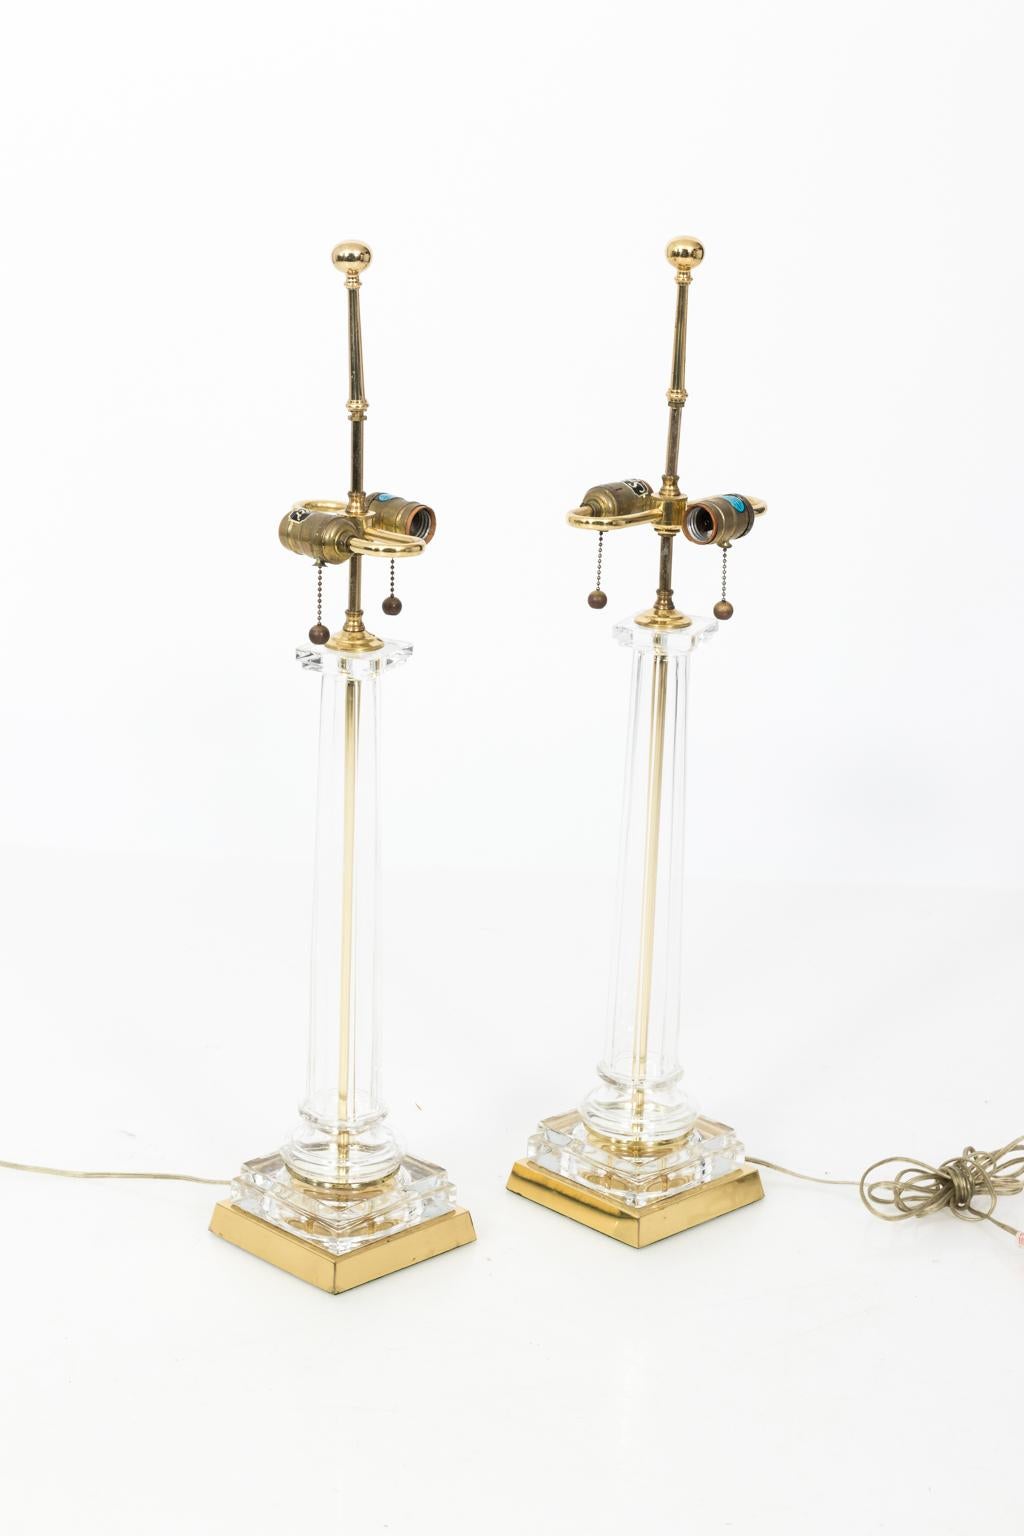 1950s Chapman glass column lamps with brass bases. Shades not included.
     